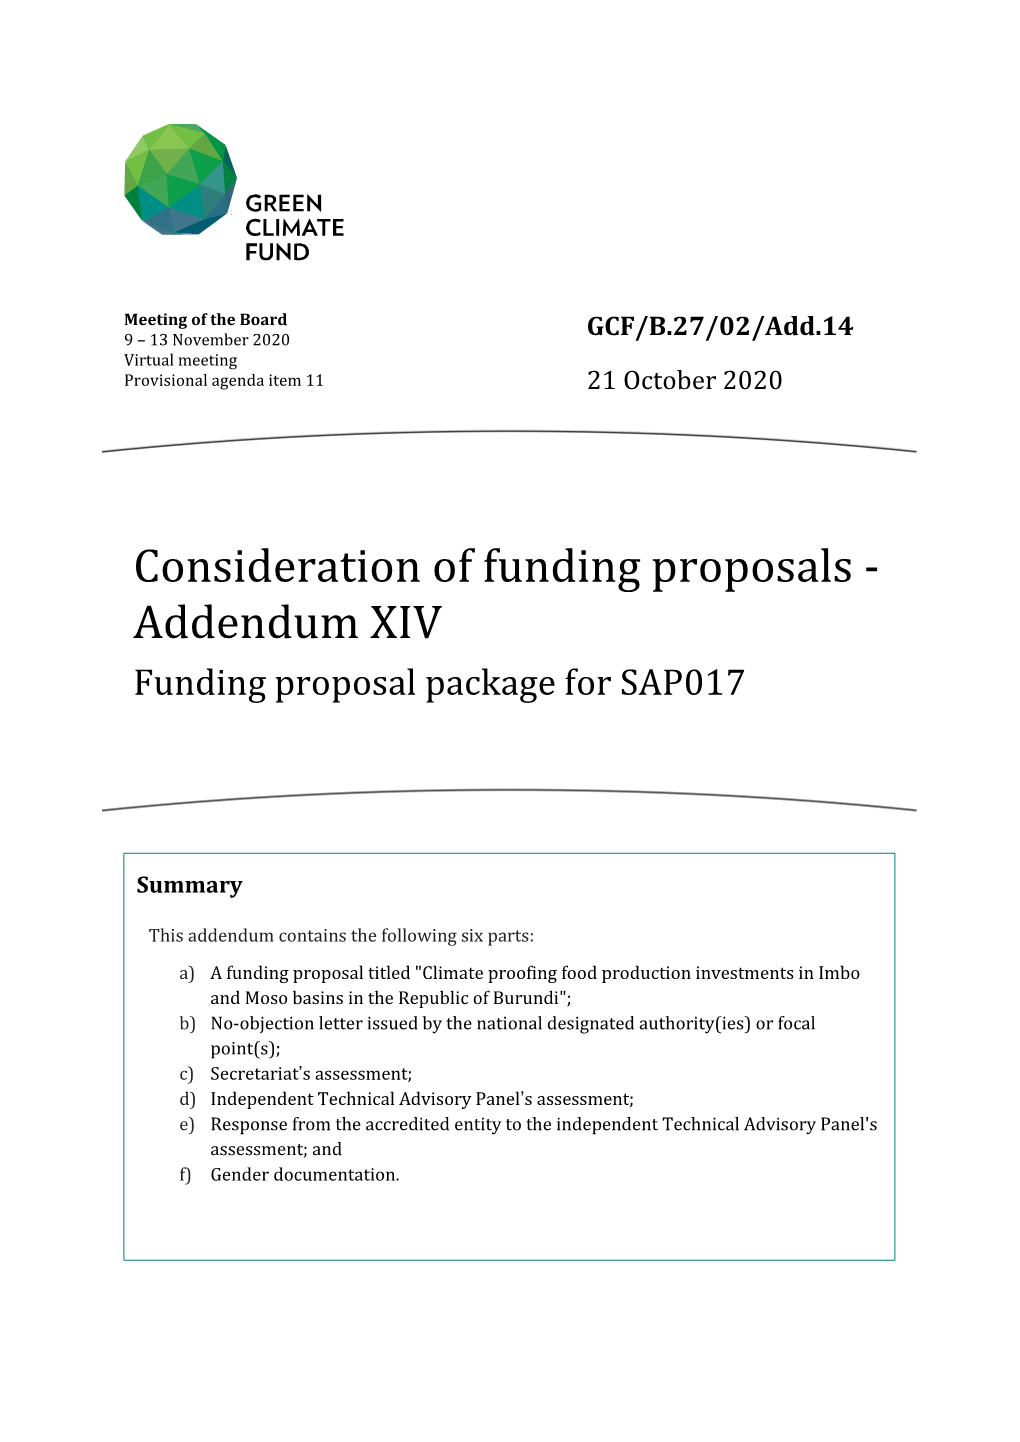 Consideration of Funding Proposals - Addendum XIV Funding Proposal Package for SAP017